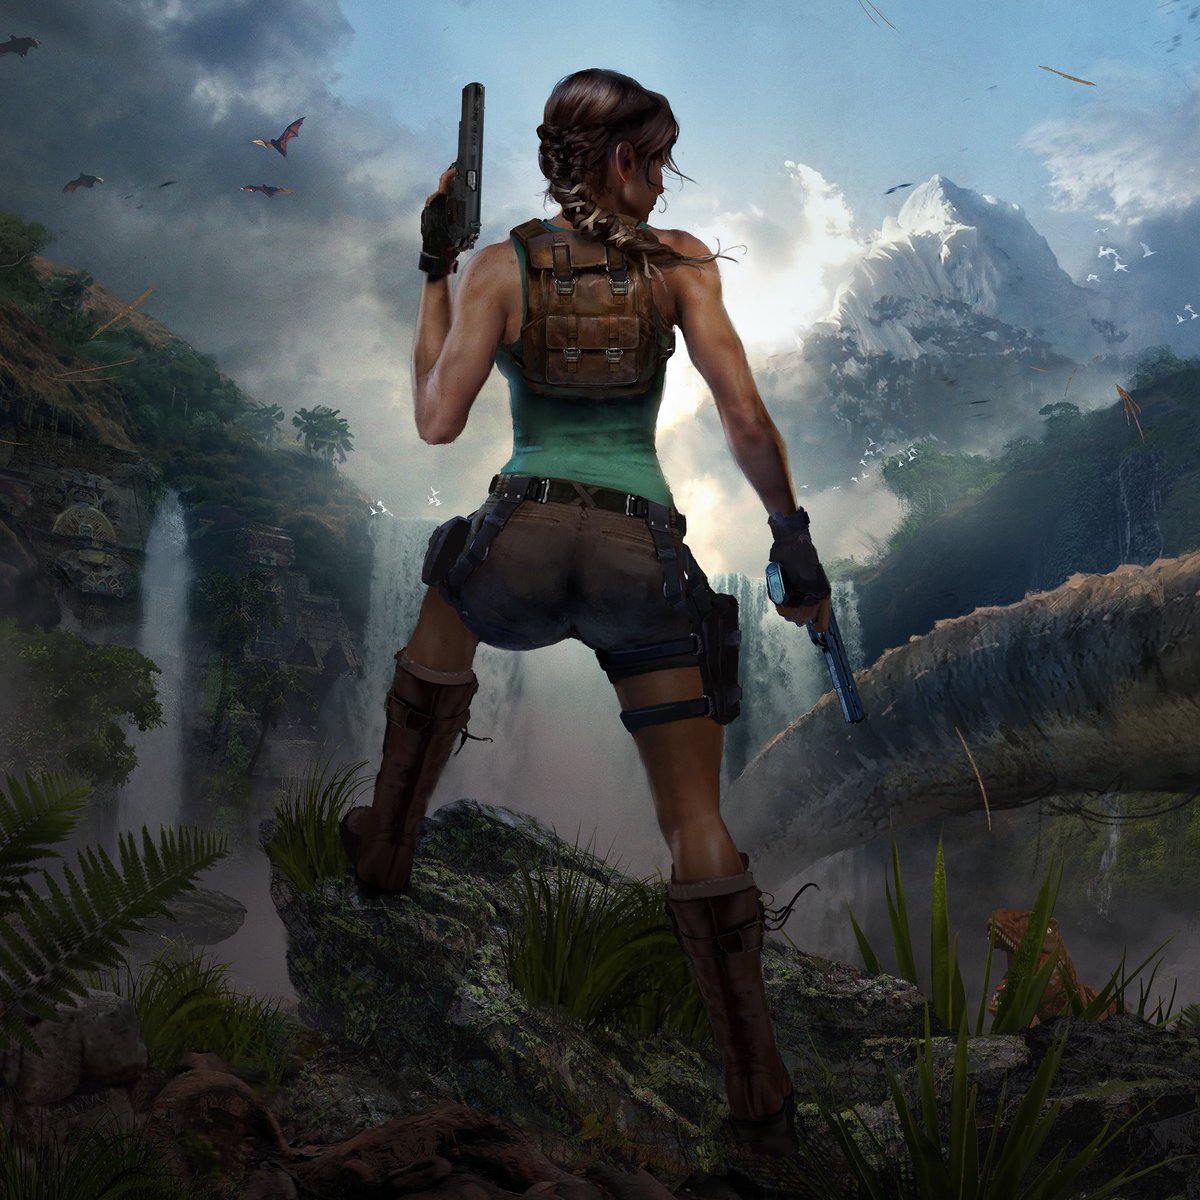 Exciting news from #TombRaider! Dmitri Johnson revealed plans for animation, live-action film & TV, plus a trilogy of Unreal 5 games. Assets from games might even speed up live-action production!